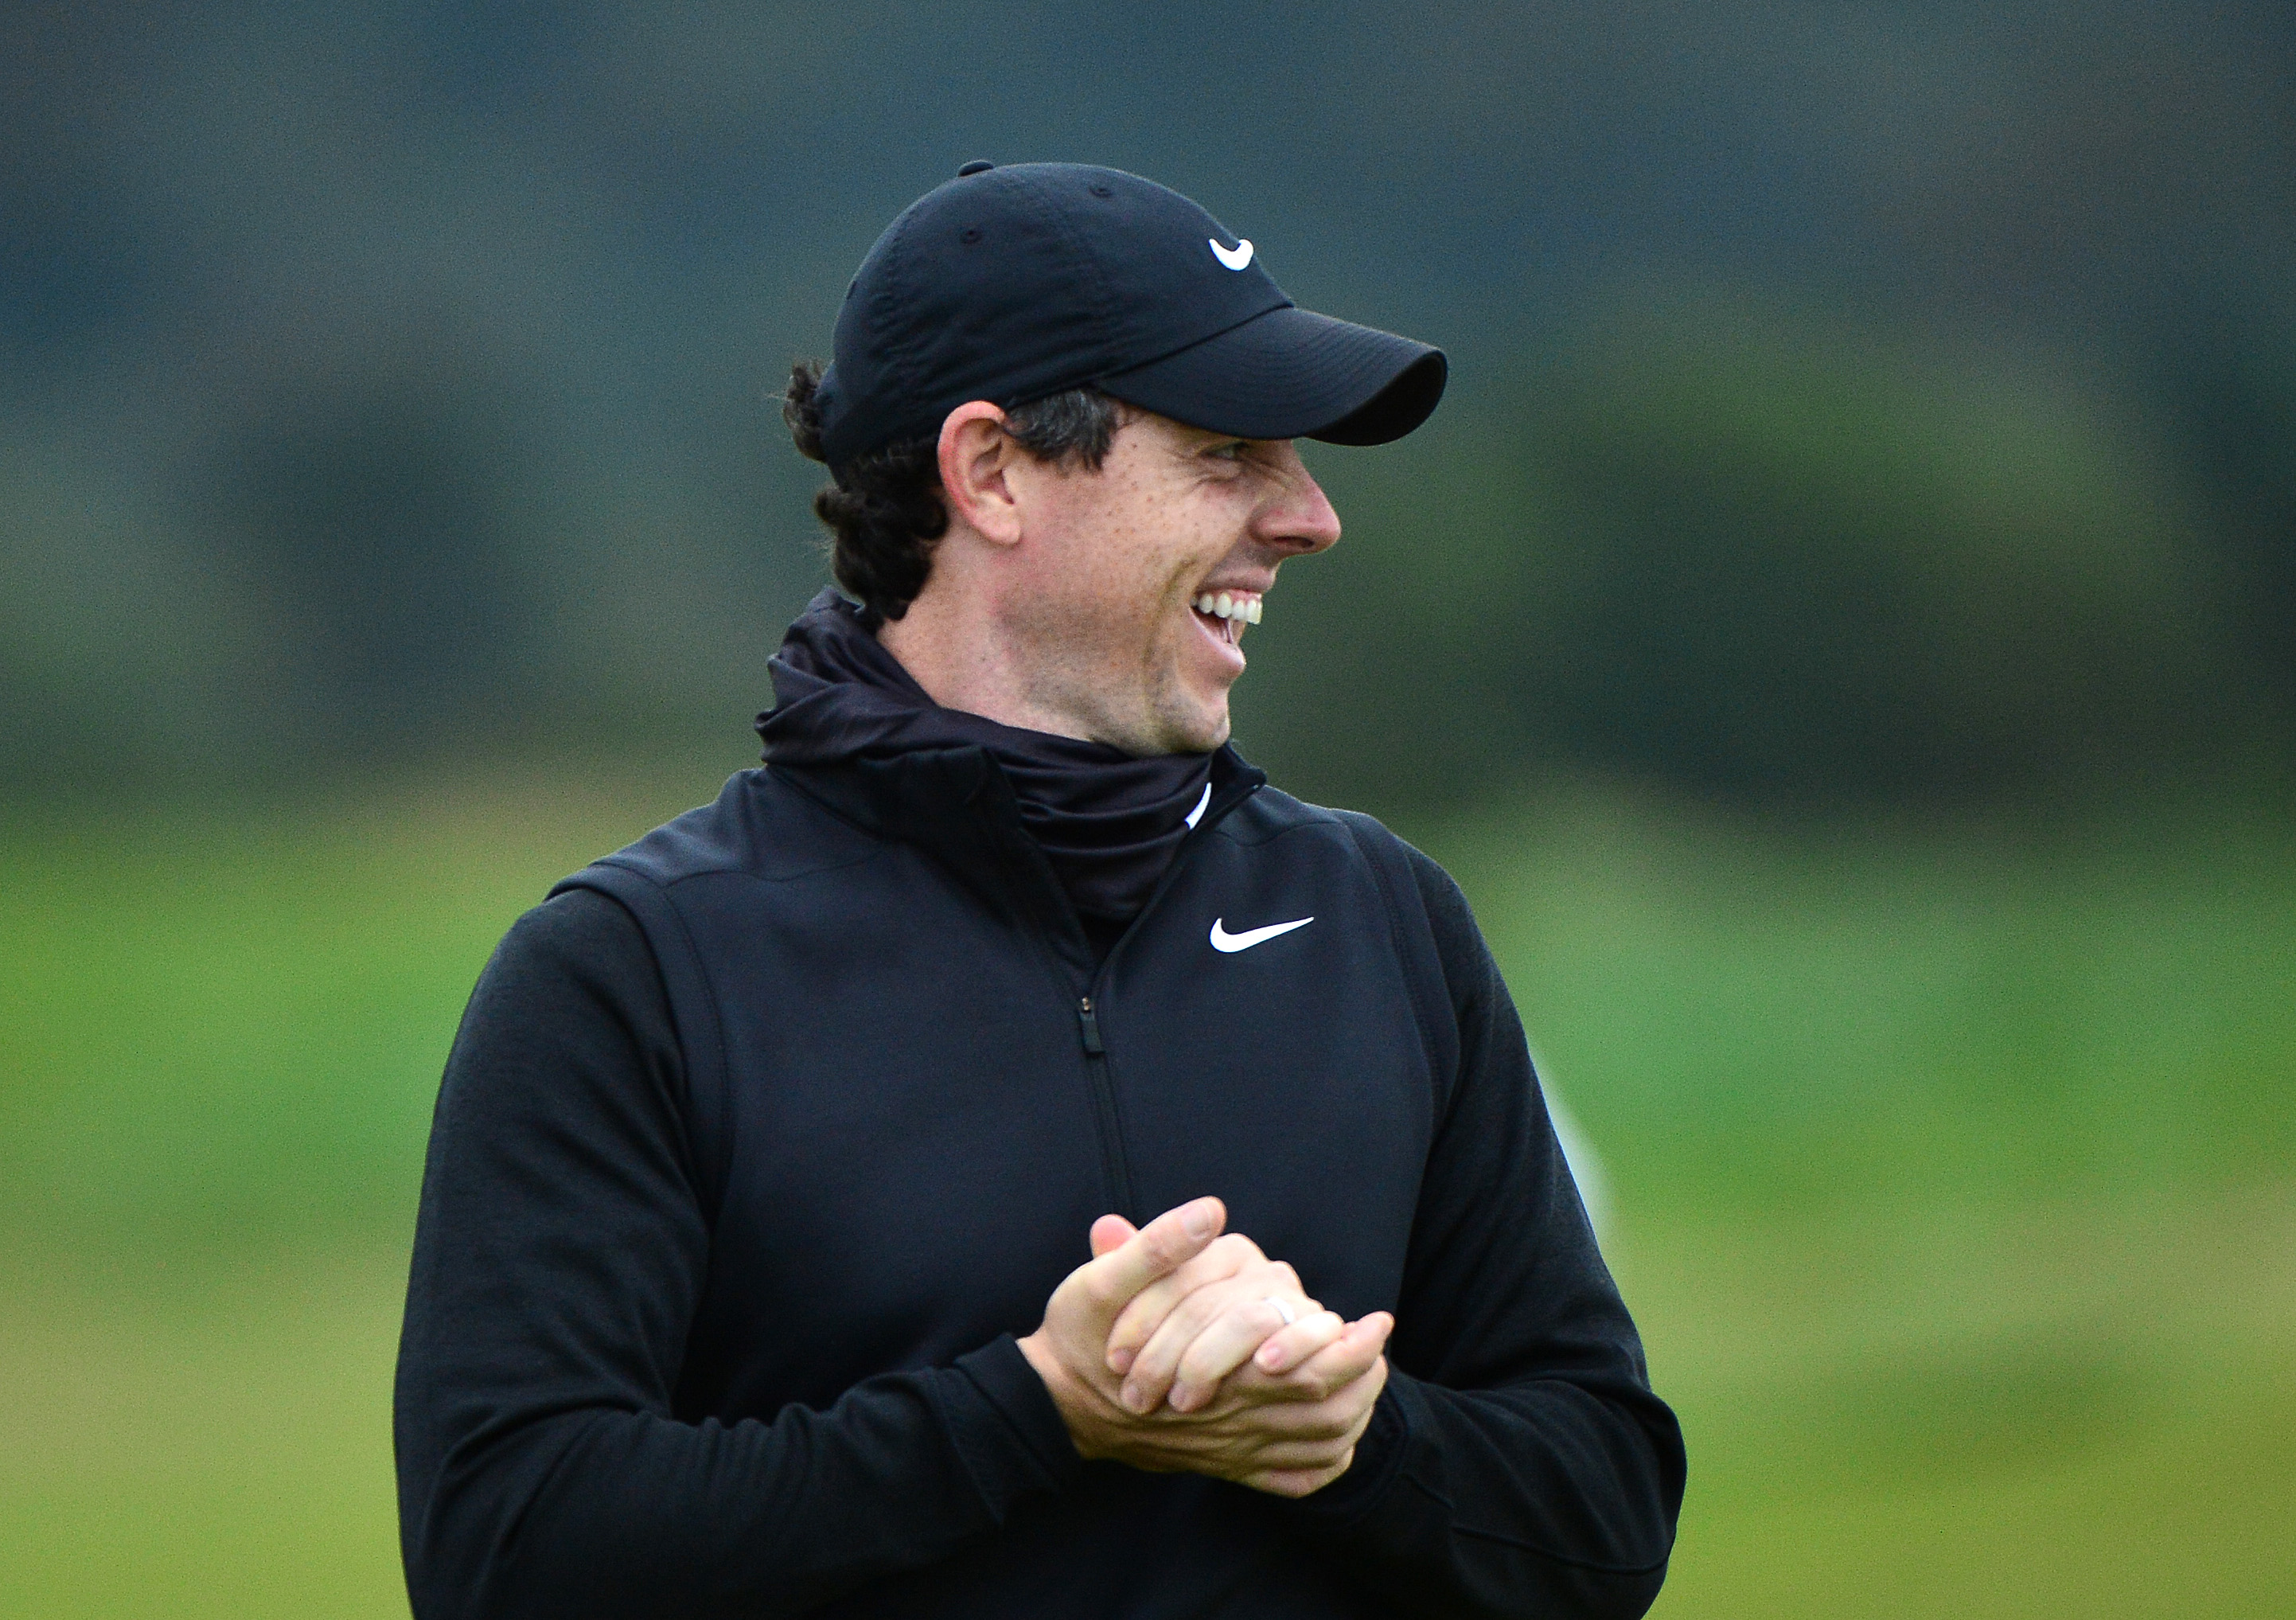 It S Clear Rory Mcilroy Is Defecting From Europe To Play For The United States At The 2020 Ryder Cup This Is The Loop Golf Digest